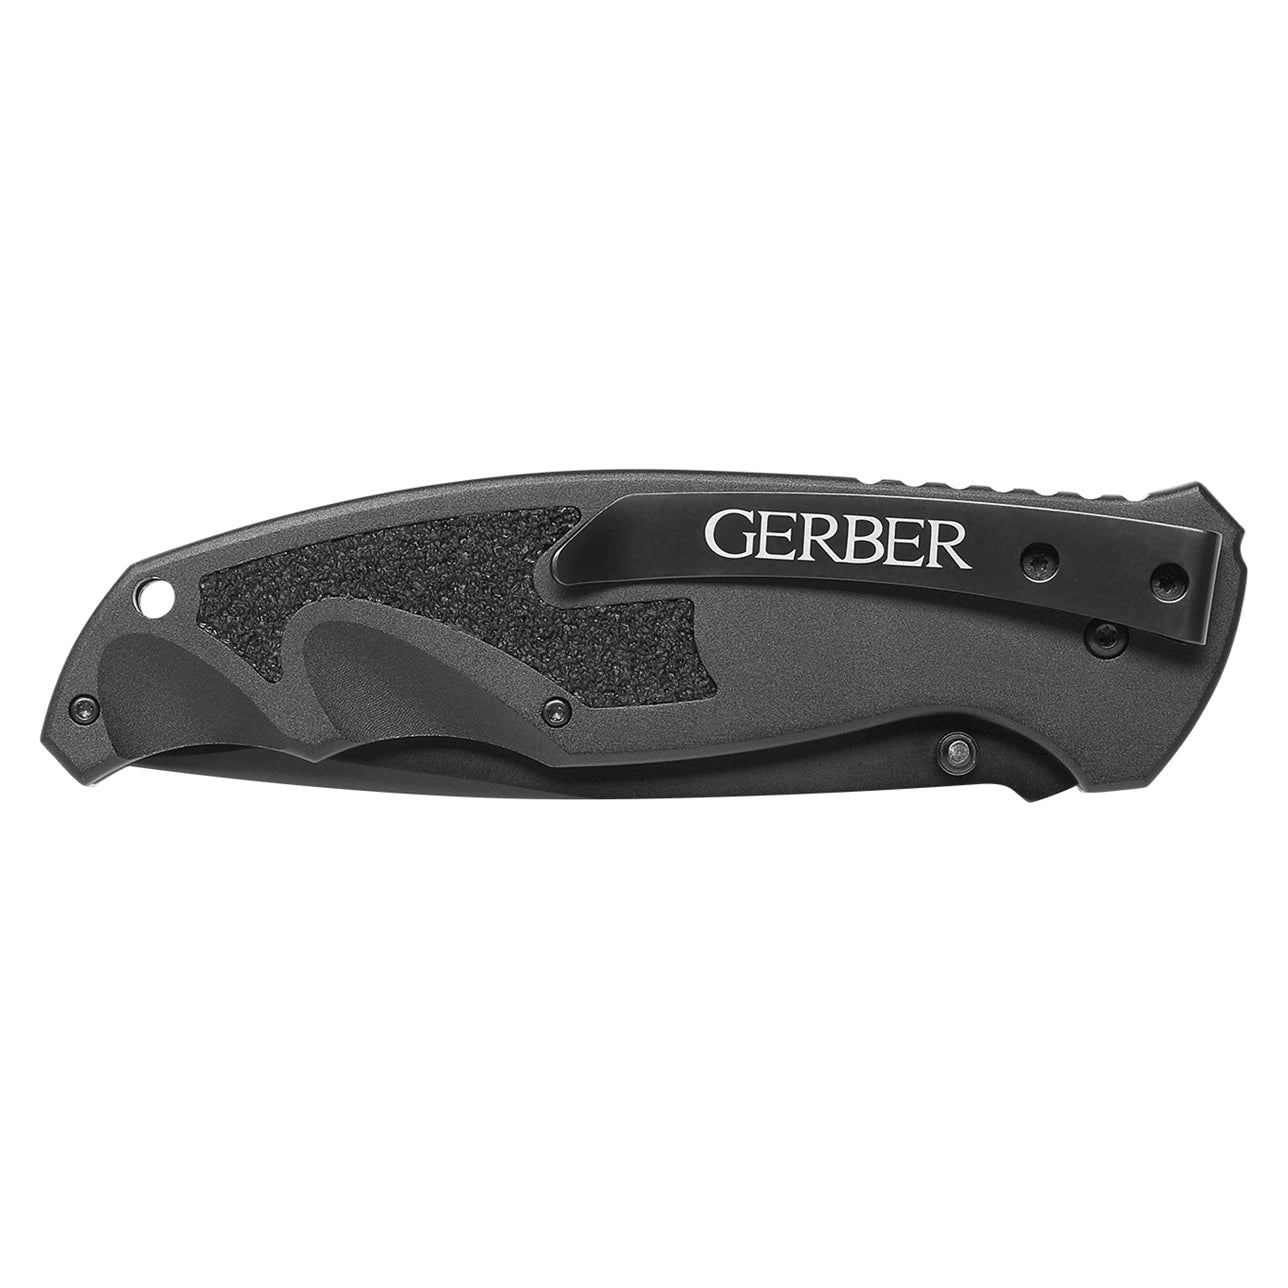 gerber fast assist custom open knife for sale in austin texas at hawkes outdoors 2102512882